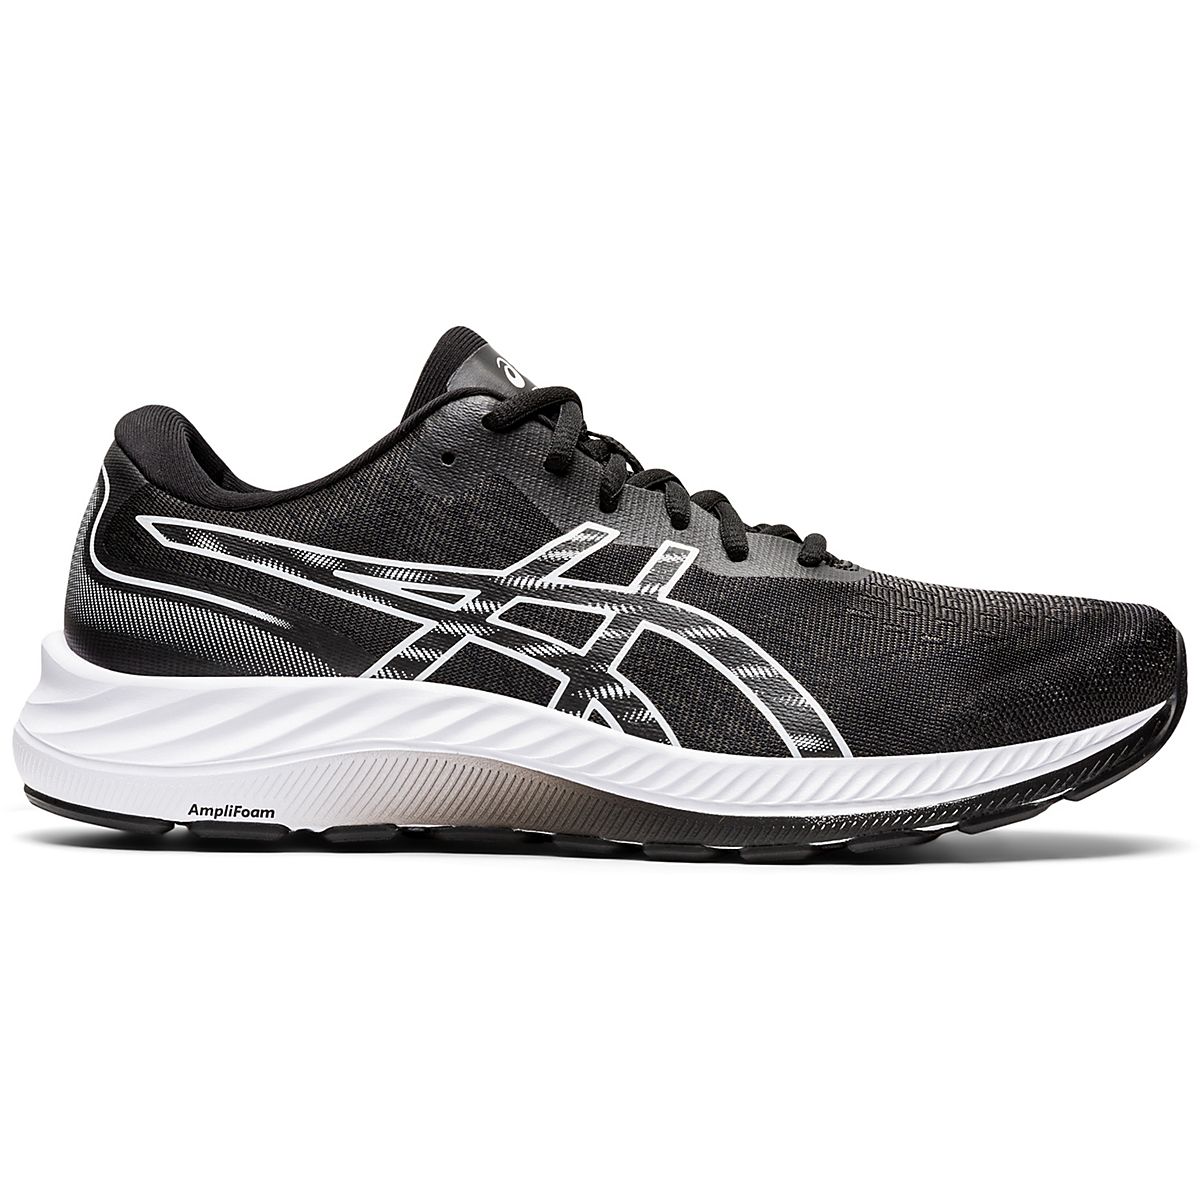 ASICS Men's Gel Excite 9 Running Shoes | Free Shipping at Academy